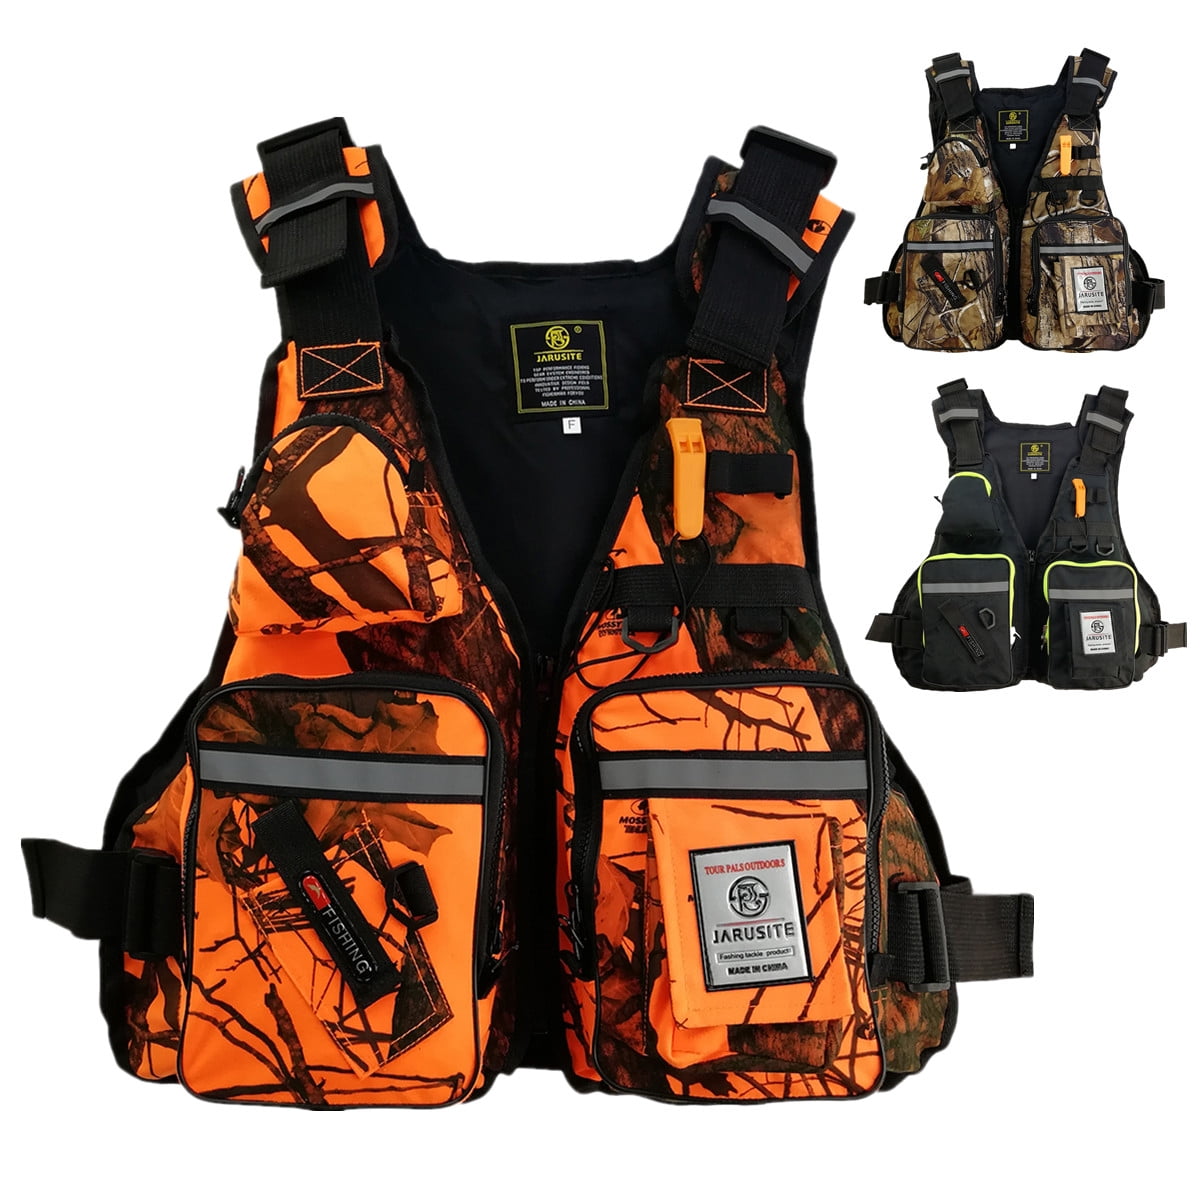 Details about   New Style Adult Water Buoyancy Aid Sailing Kayak Fishing Canoe Life Jacket Vests 